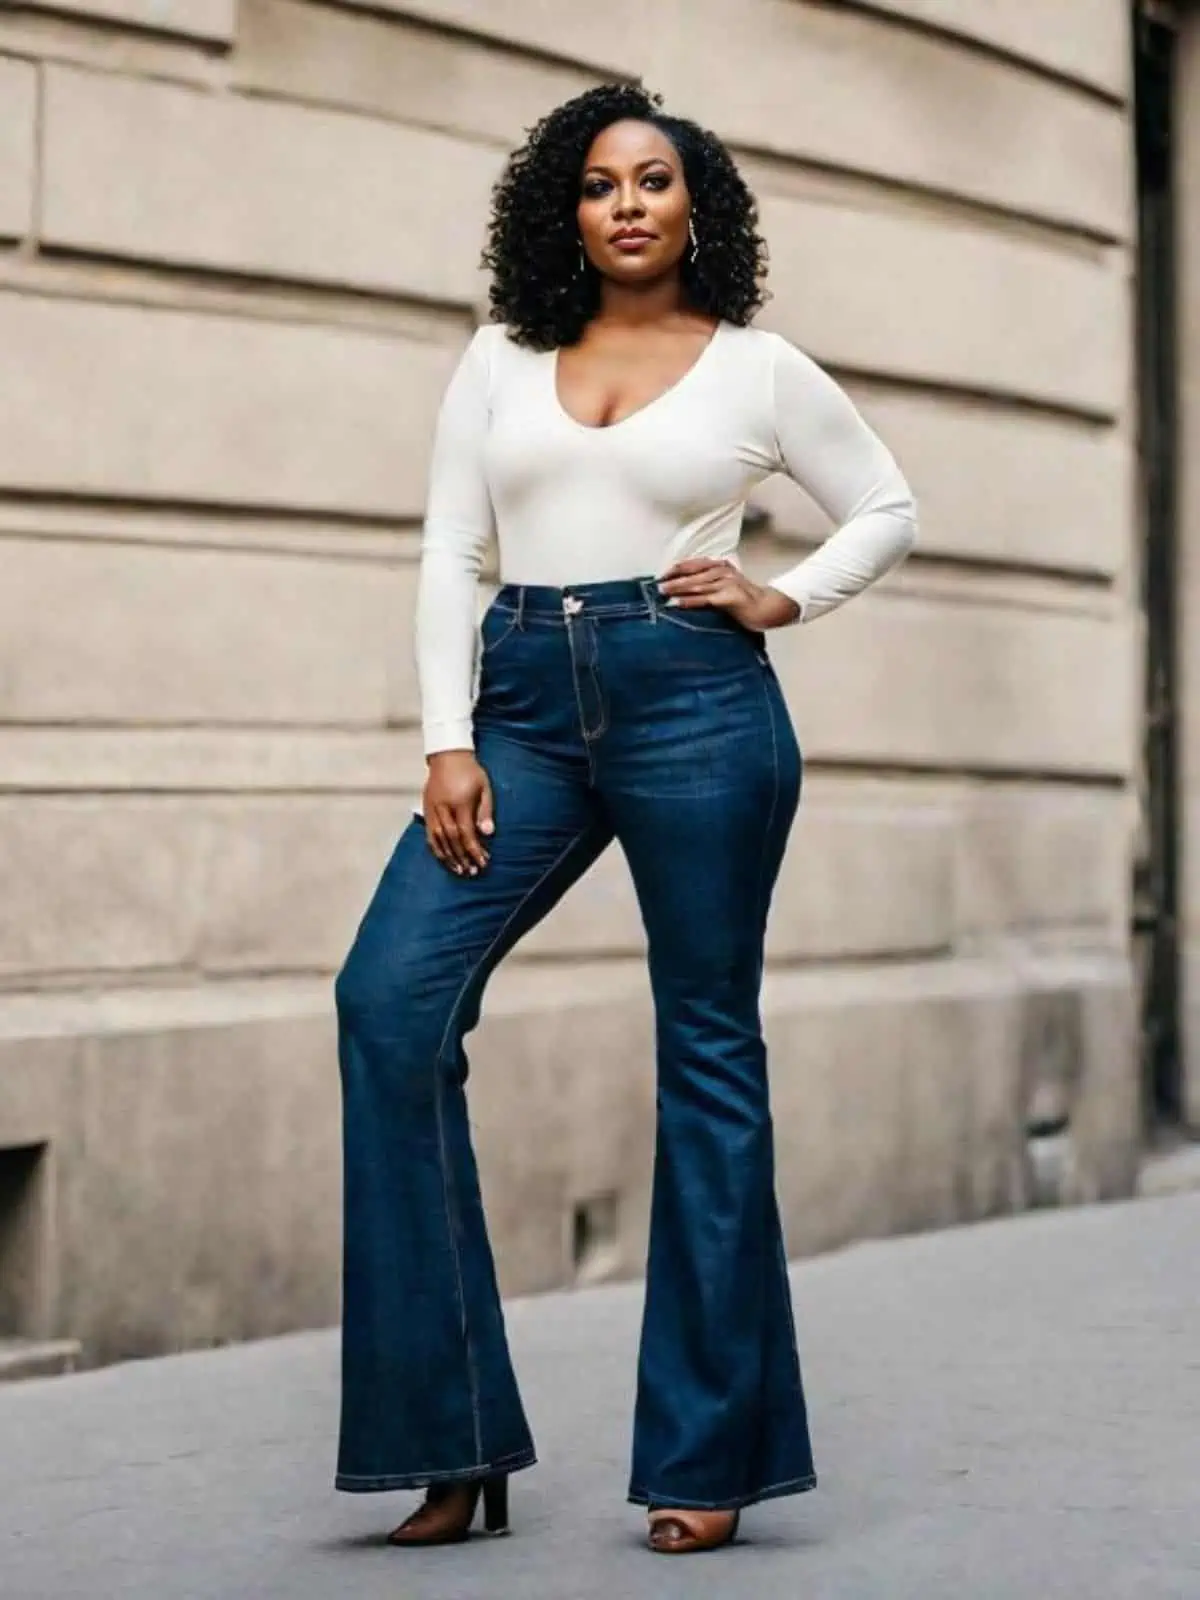 How to Wear Flare Jeans & Favorite Flare Jeans